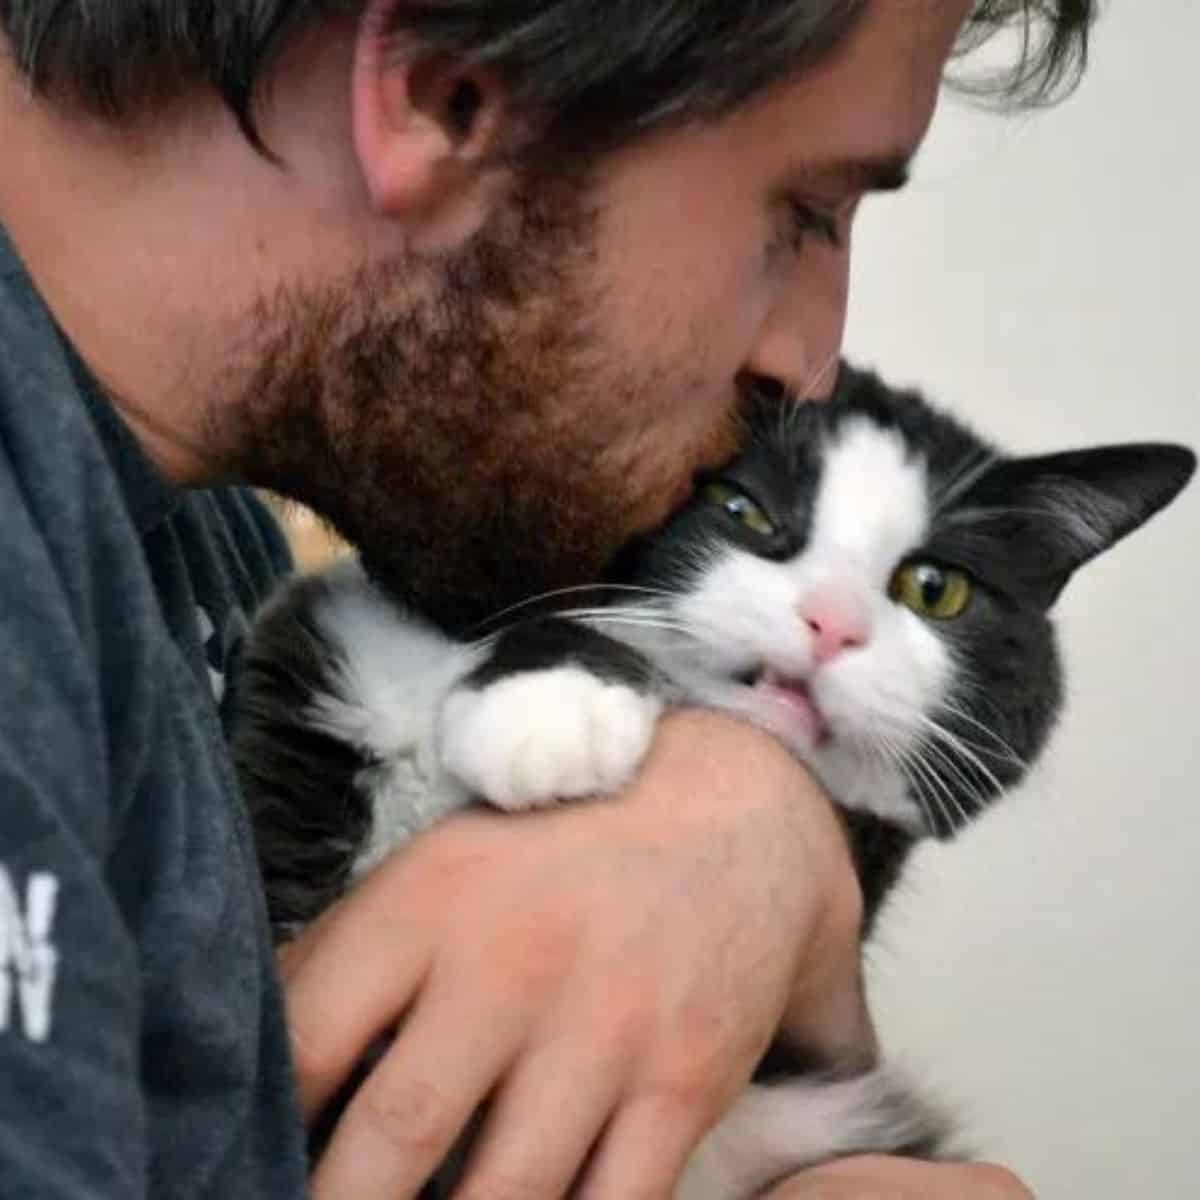 a man is holding a cat in his arms and kissing it